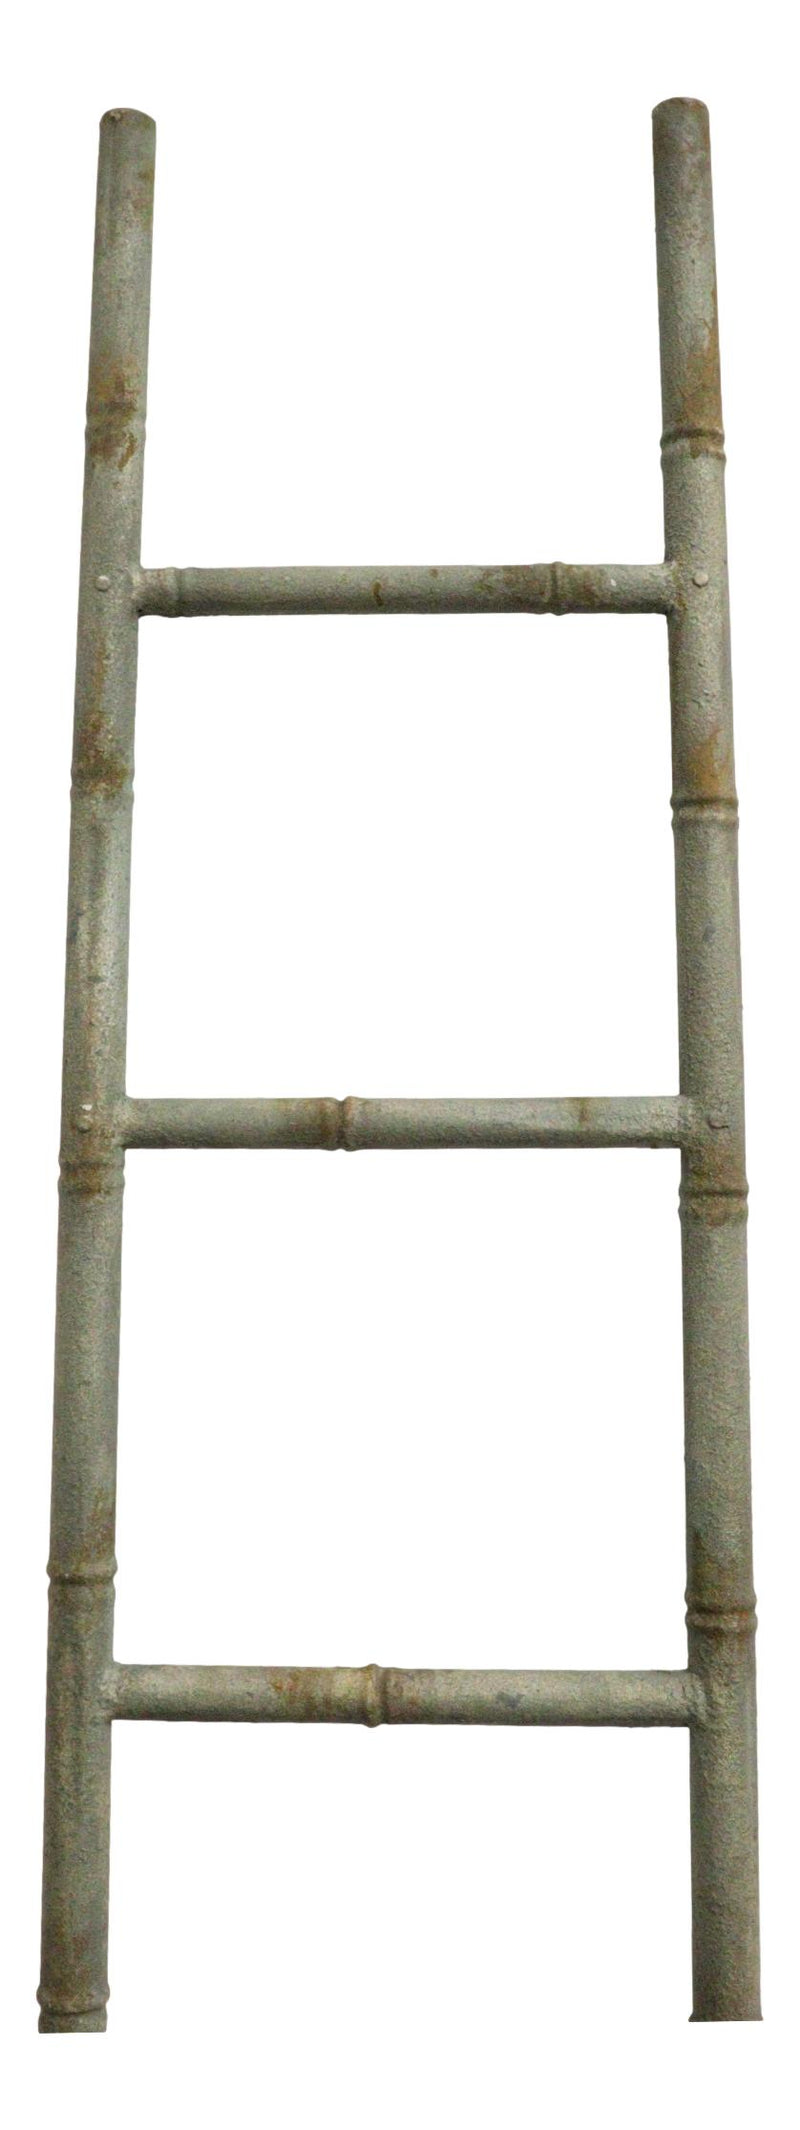 Rustic Farmhouse Decorative Storage Leaning Heavily Distressed Metal Ladder